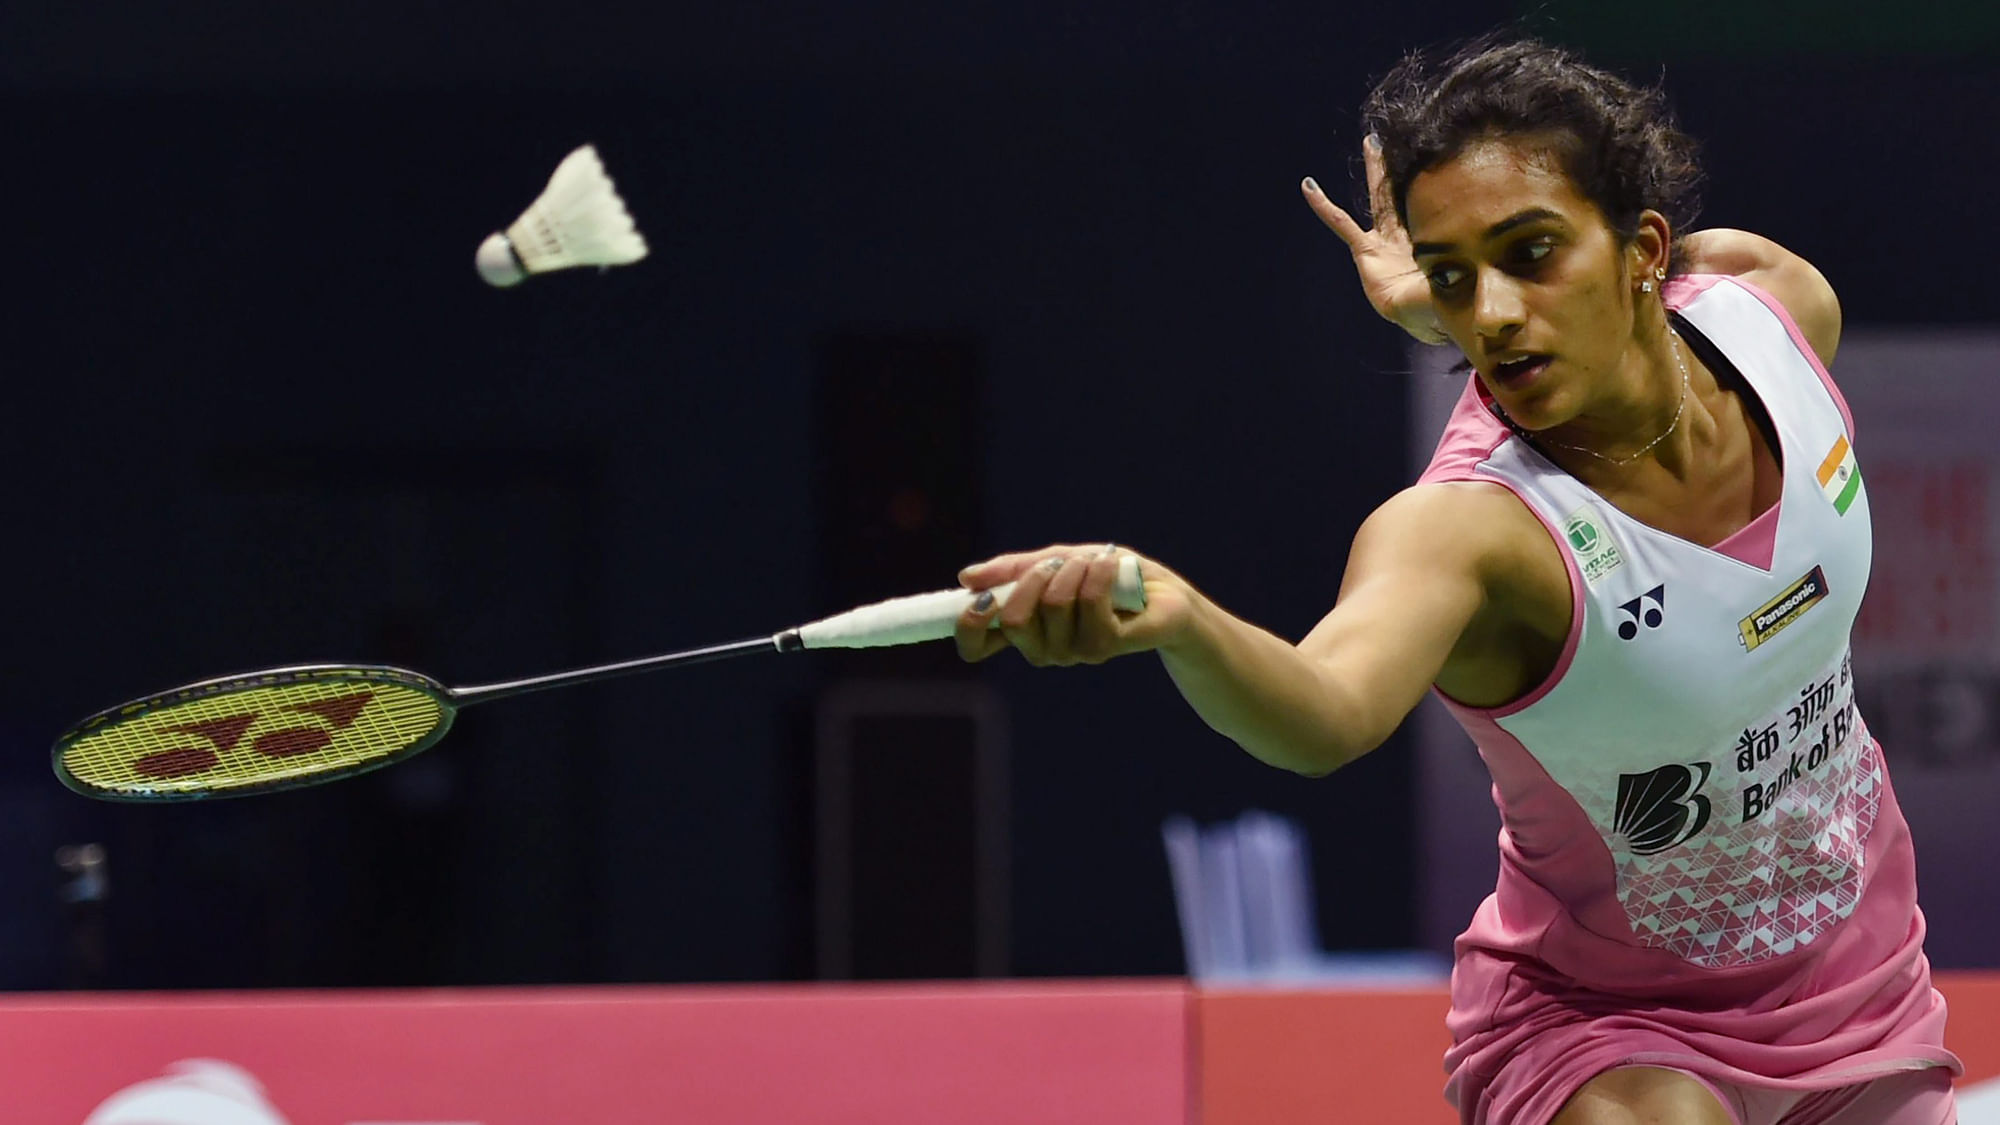 Olympic silver medallist shuttler PV Sindhu eked out a hard-fought win over world number two and defending champion Akane Yamaguchi.